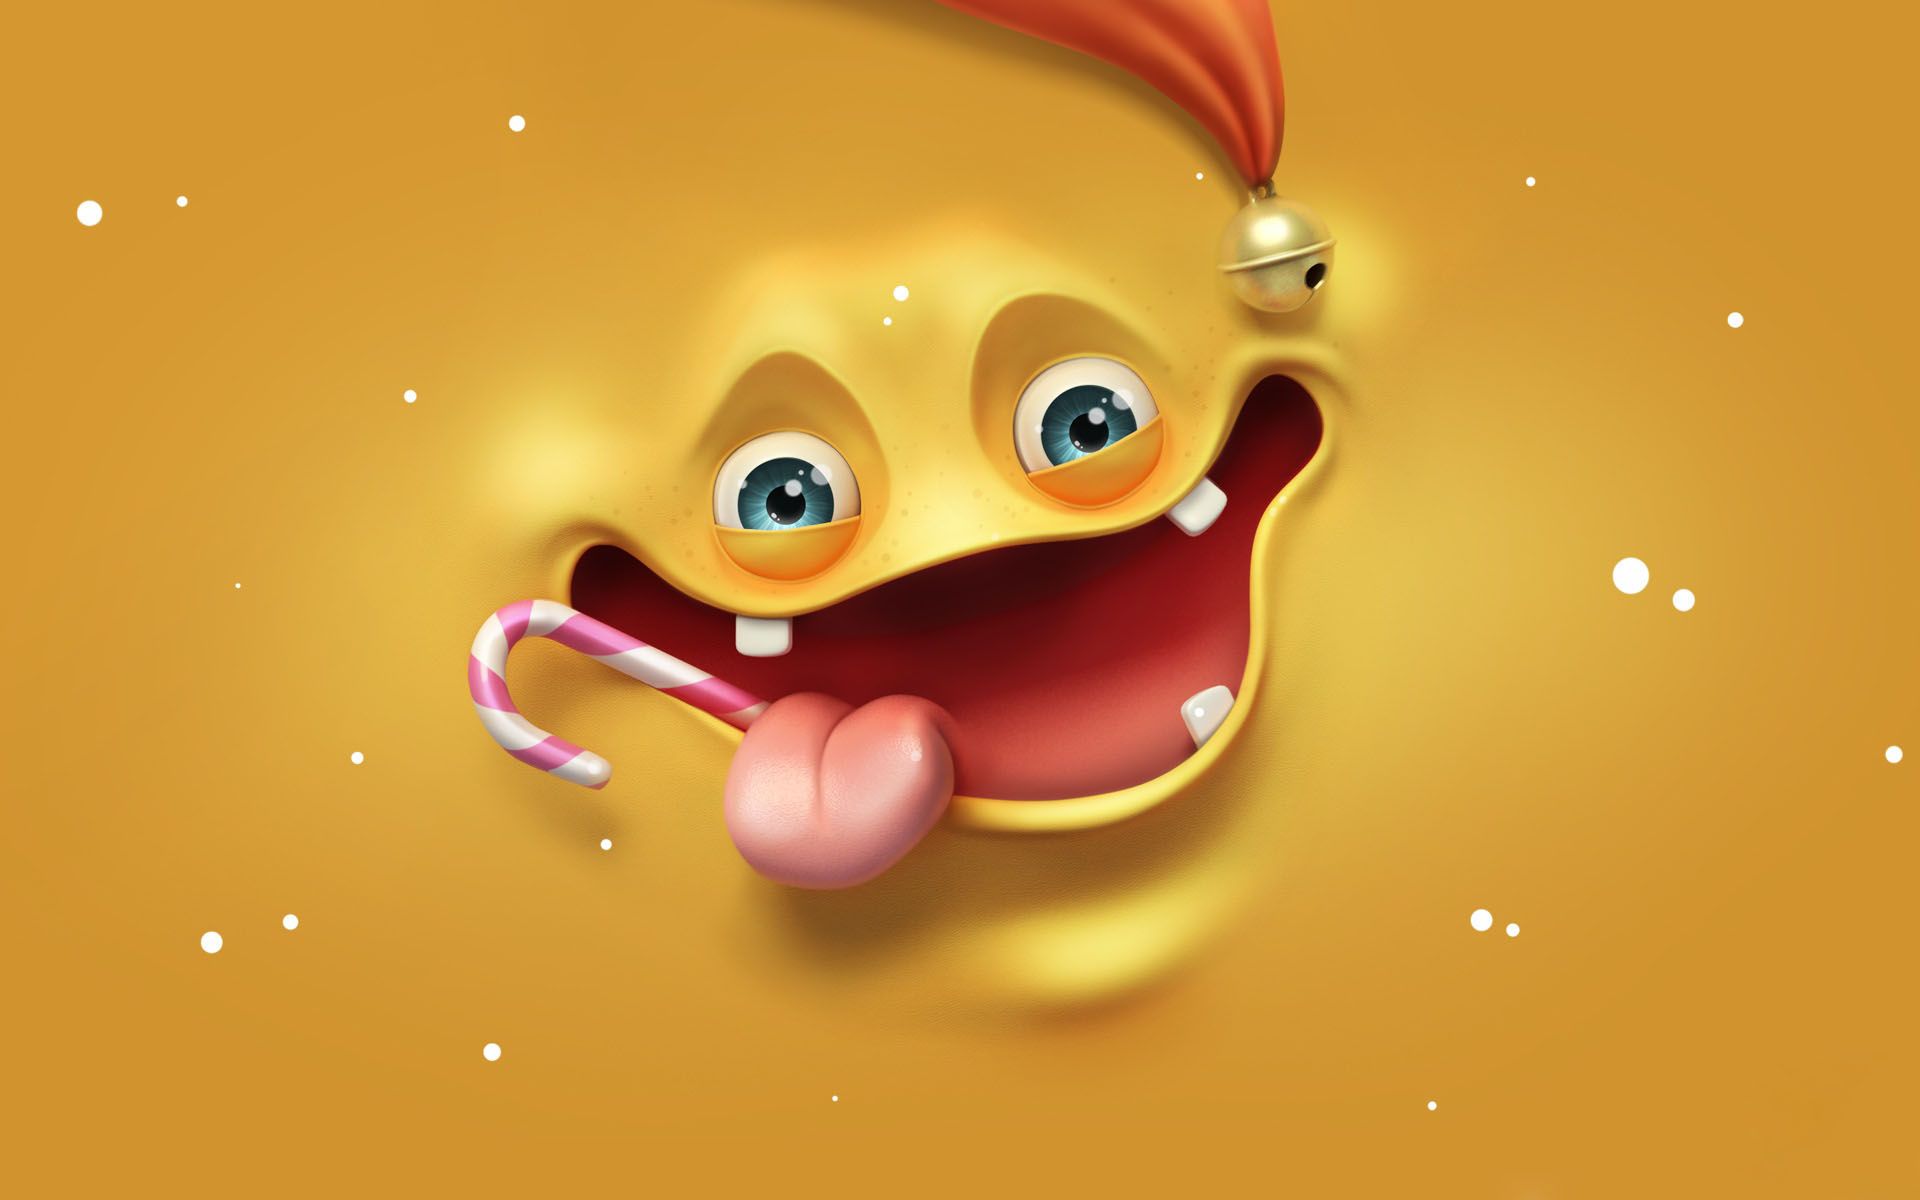 Small Cute Monster Latest HD Wallpaper Free Download. New HD Wallpaper Download. Cartoon wallpaper, Funny wallpaper, Funny wallpaper